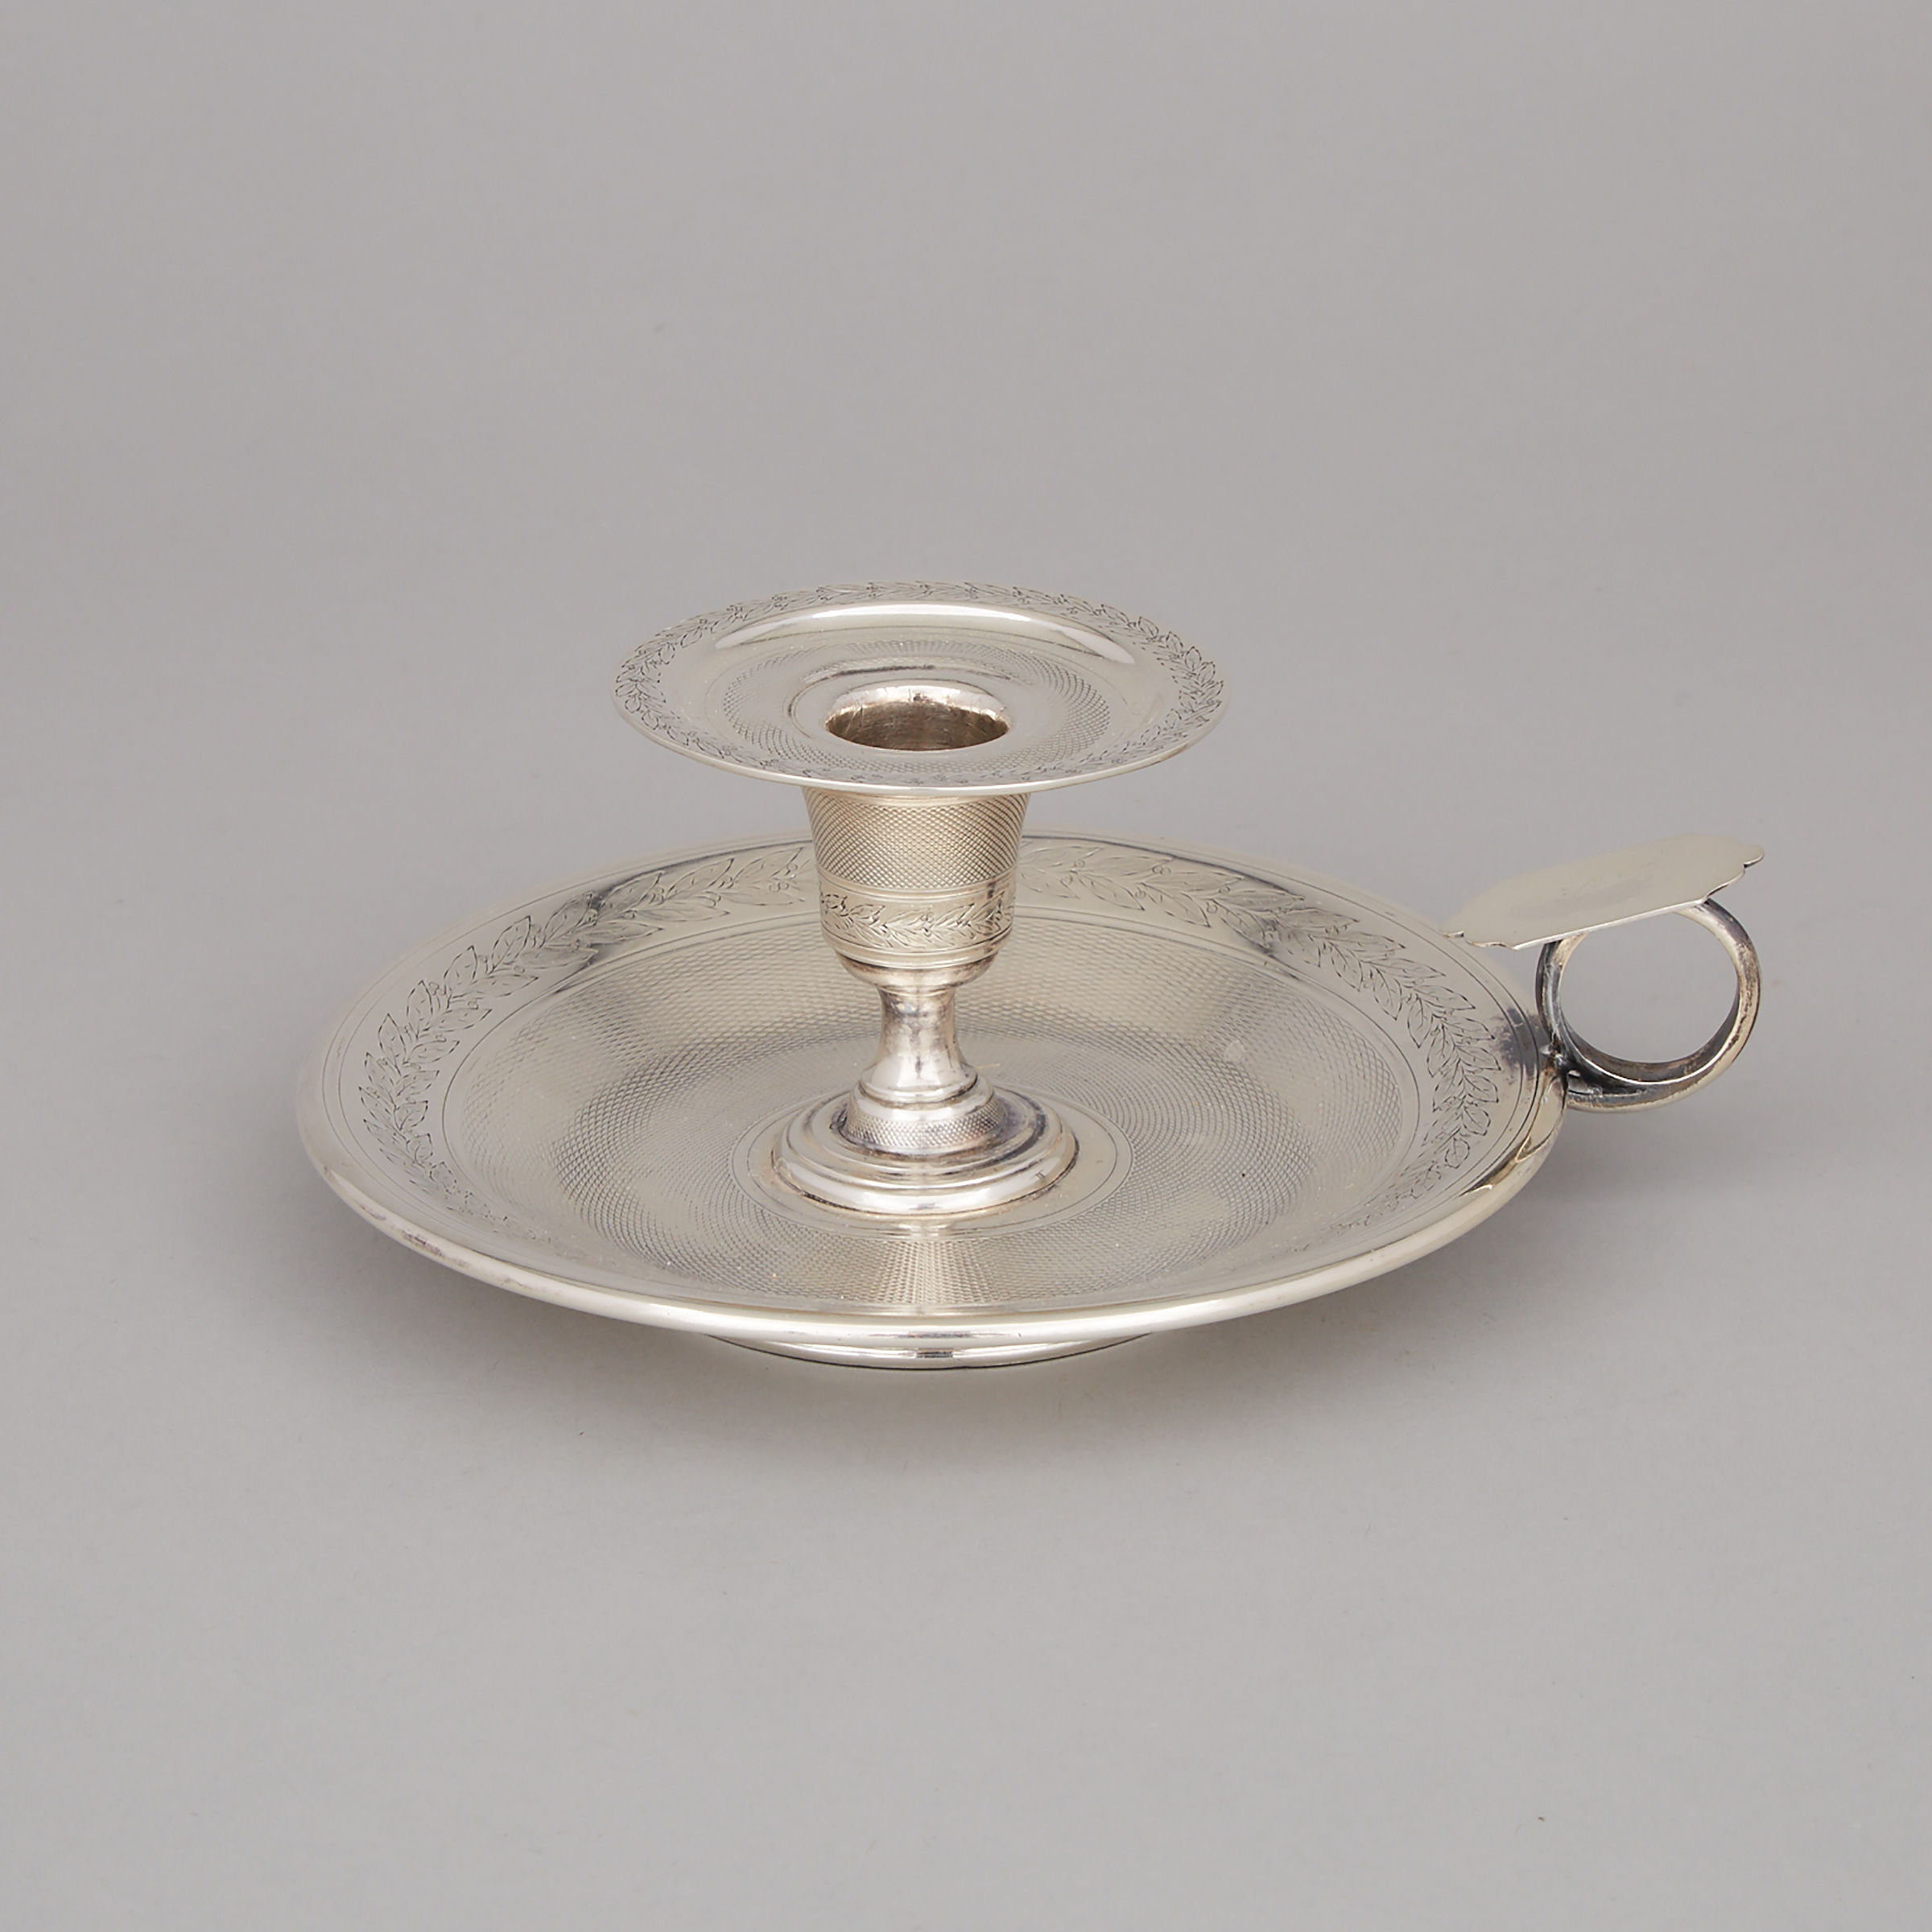 French Silver Chamberstick, Odiot, Paris, mid-19th century